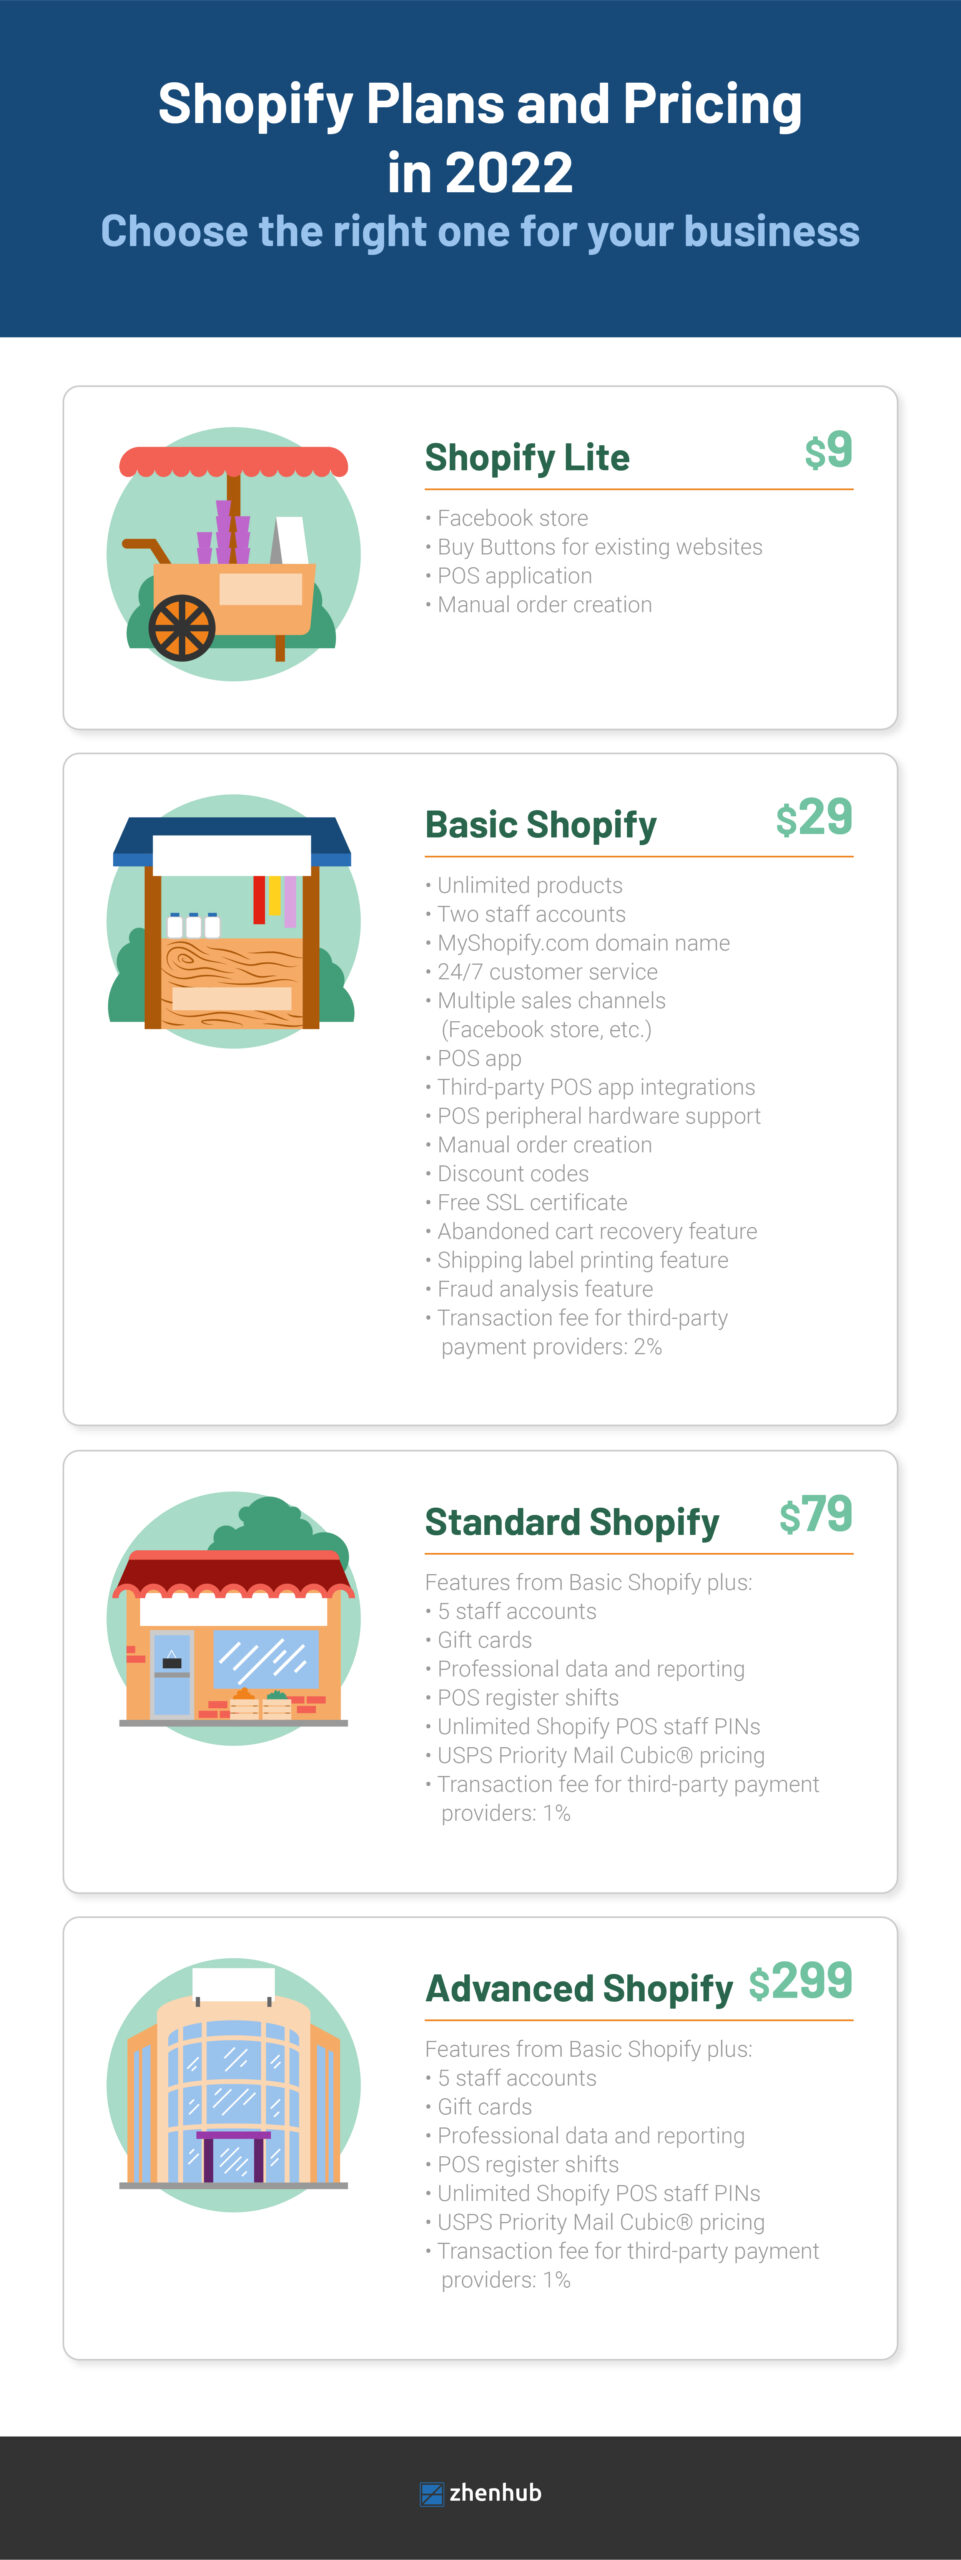 2022-shopify-plans-and-pricing